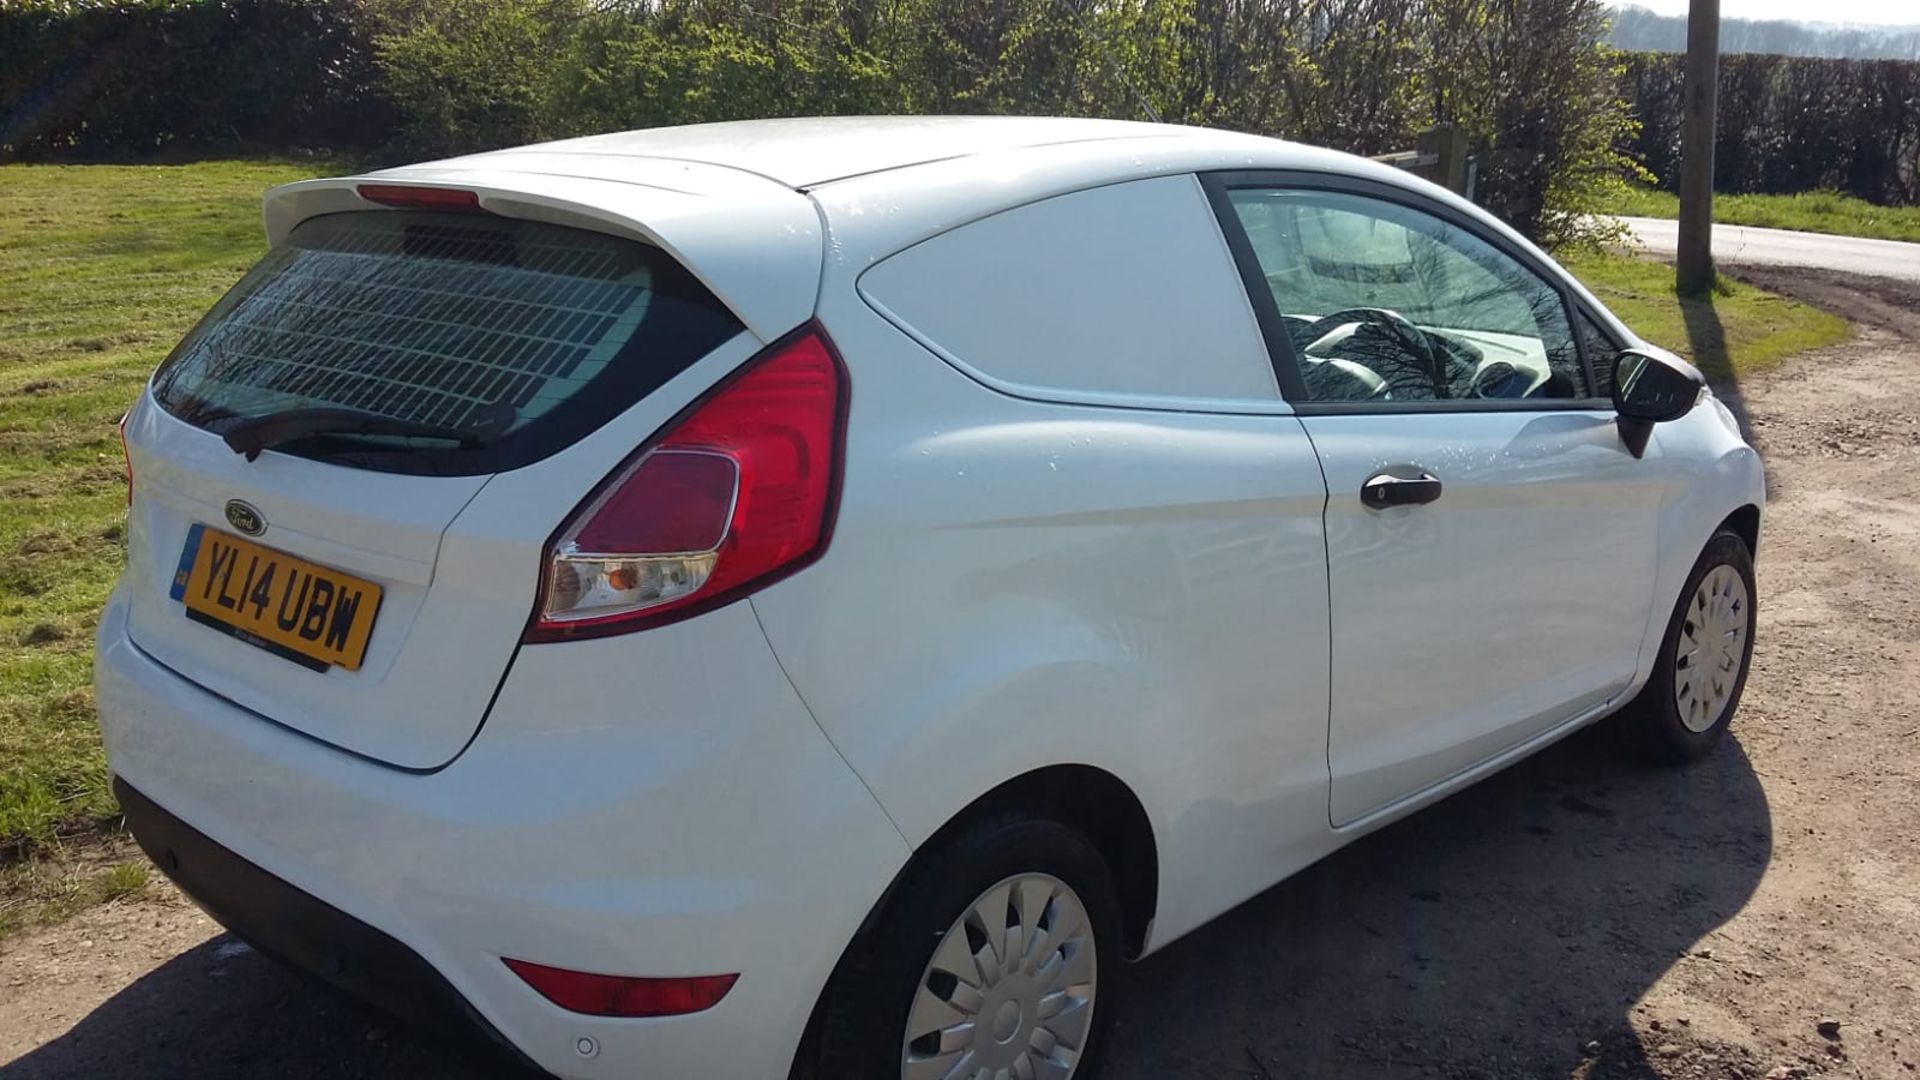 2014/14 REG FORD FIESTA ECONETIC TECH TDCI 1.6 CAR DERIVED VAN, SHOWING 0 FORMER KEEPERS *NO VAT* - Image 4 of 6